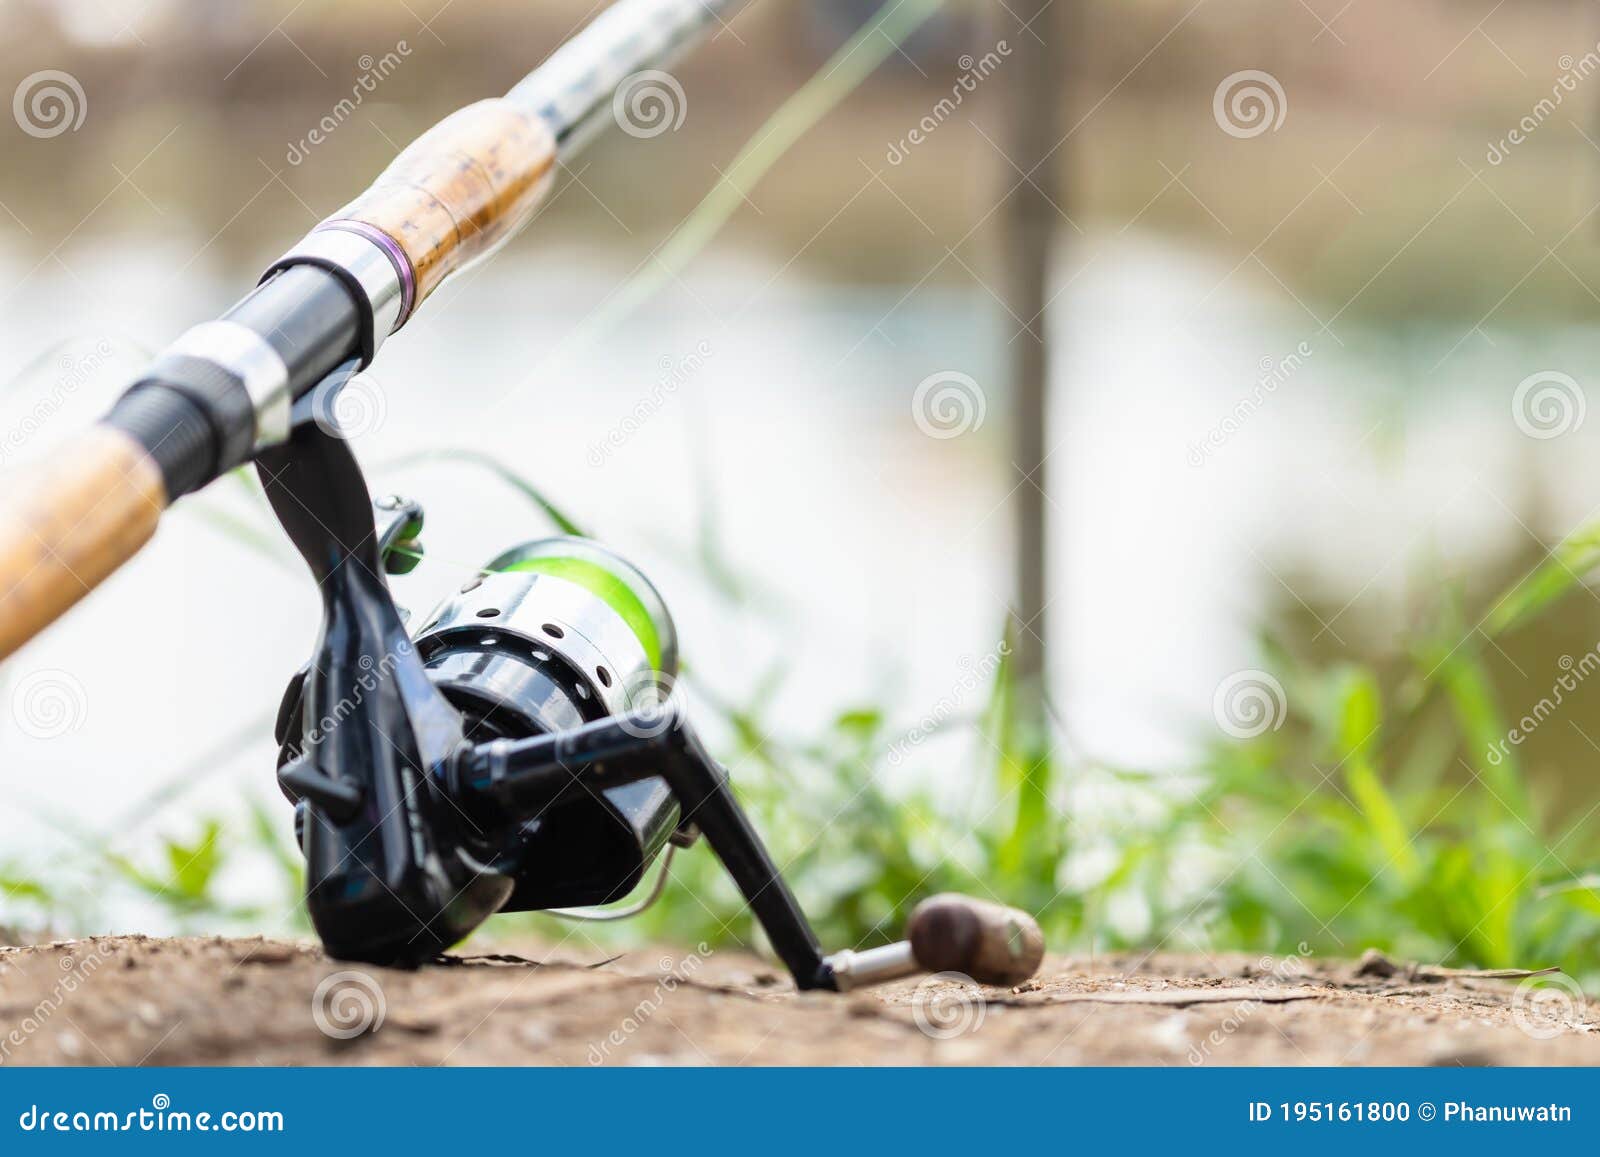 Fishing Reel and Rod in Fisherman Hand in a Pond Stock Photo